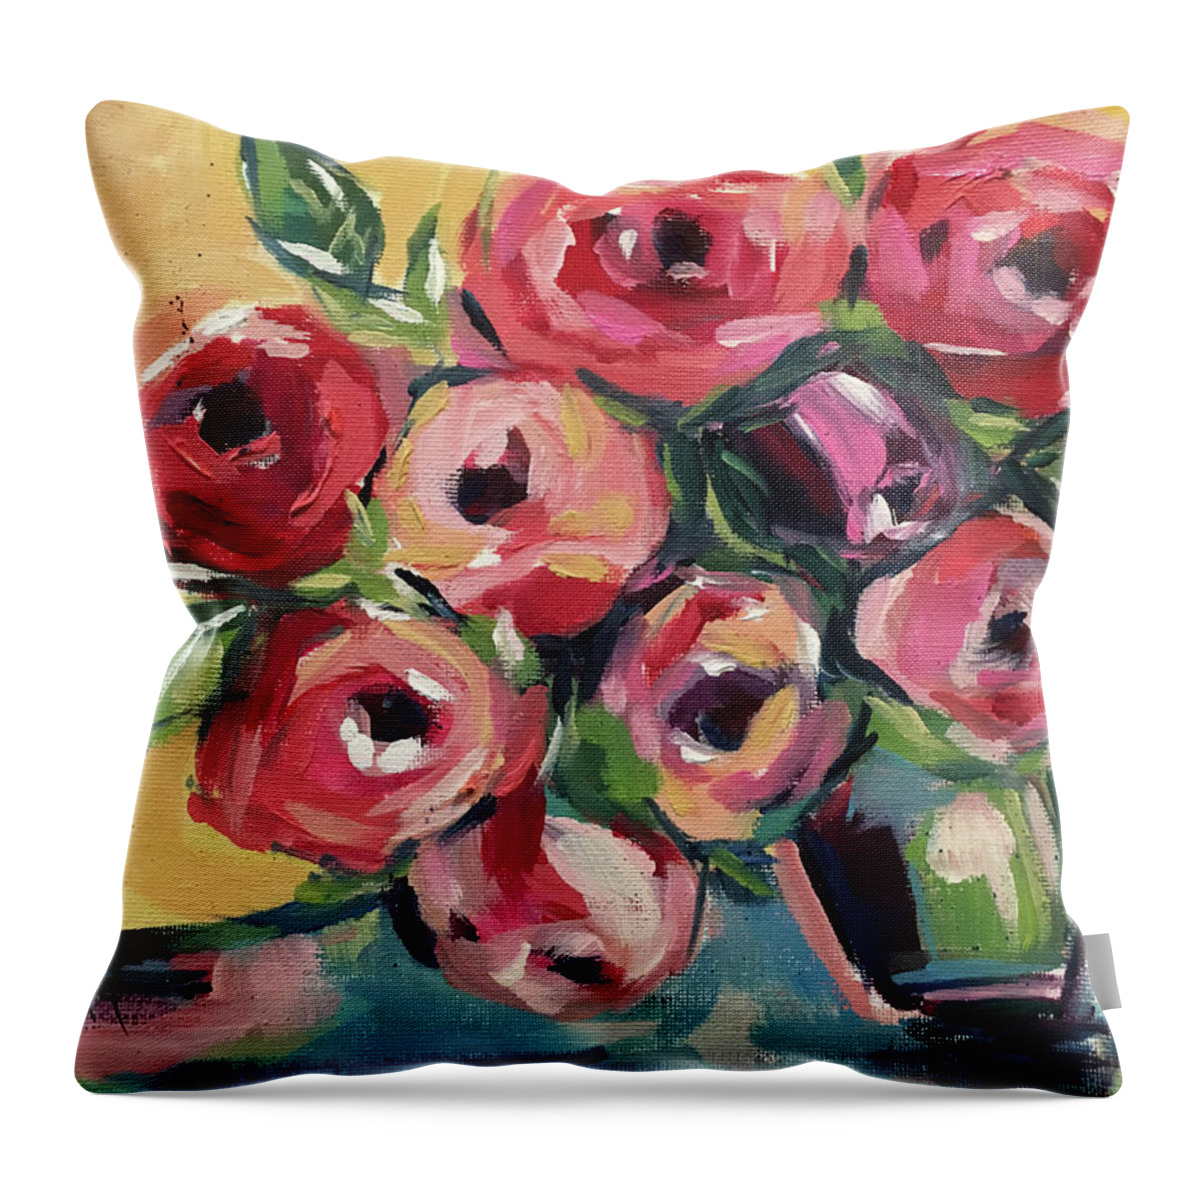 Roses Throw Pillow featuring the painting New Roses by Roxy Rich